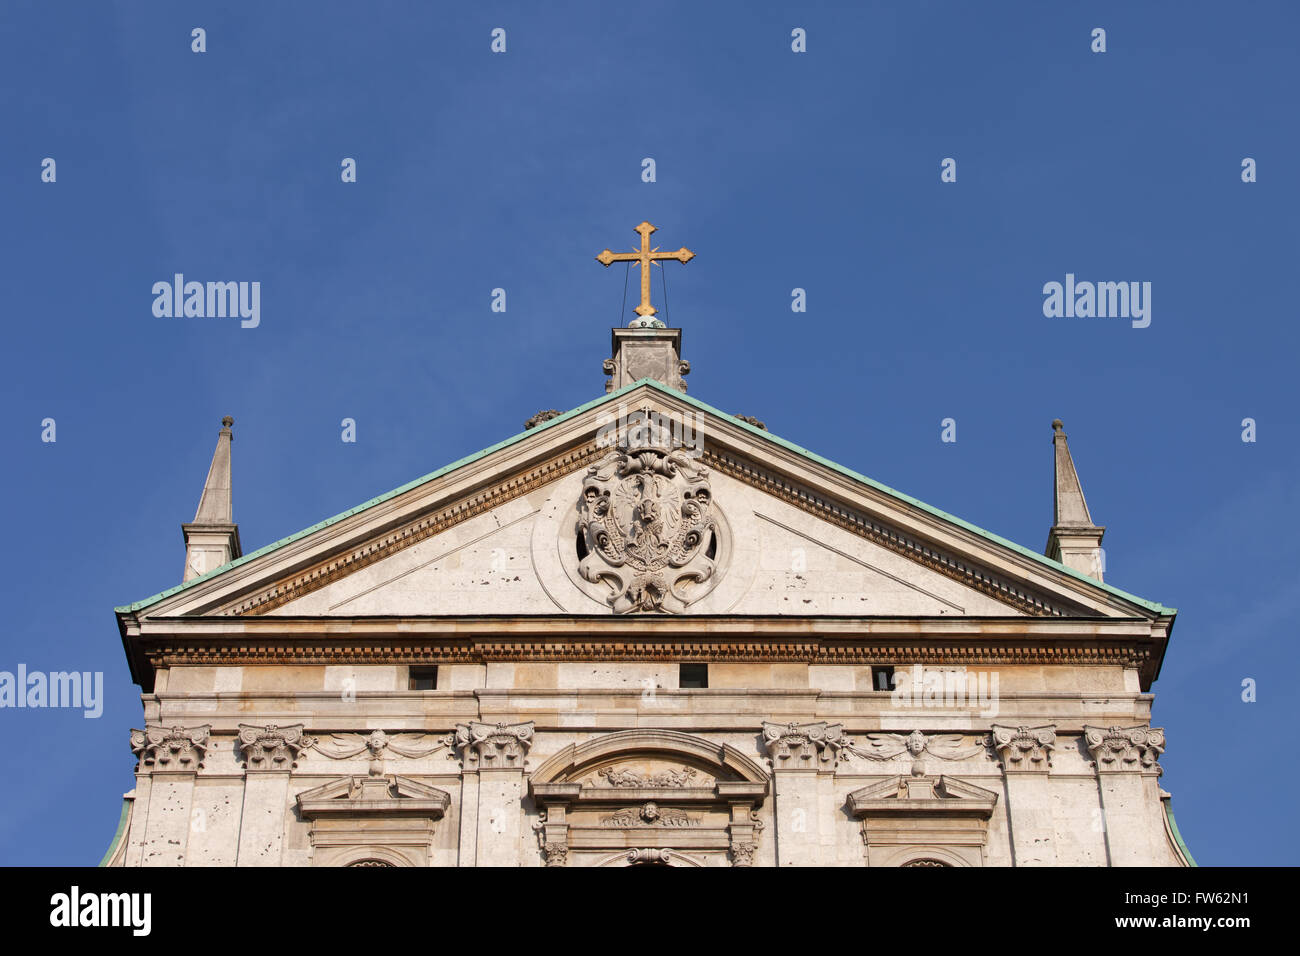 Poland, city of Krakow (Cracow), Old Town, Church of Saint Peter and Paul pediment, architectural details, Baroque architecture Stock Photo